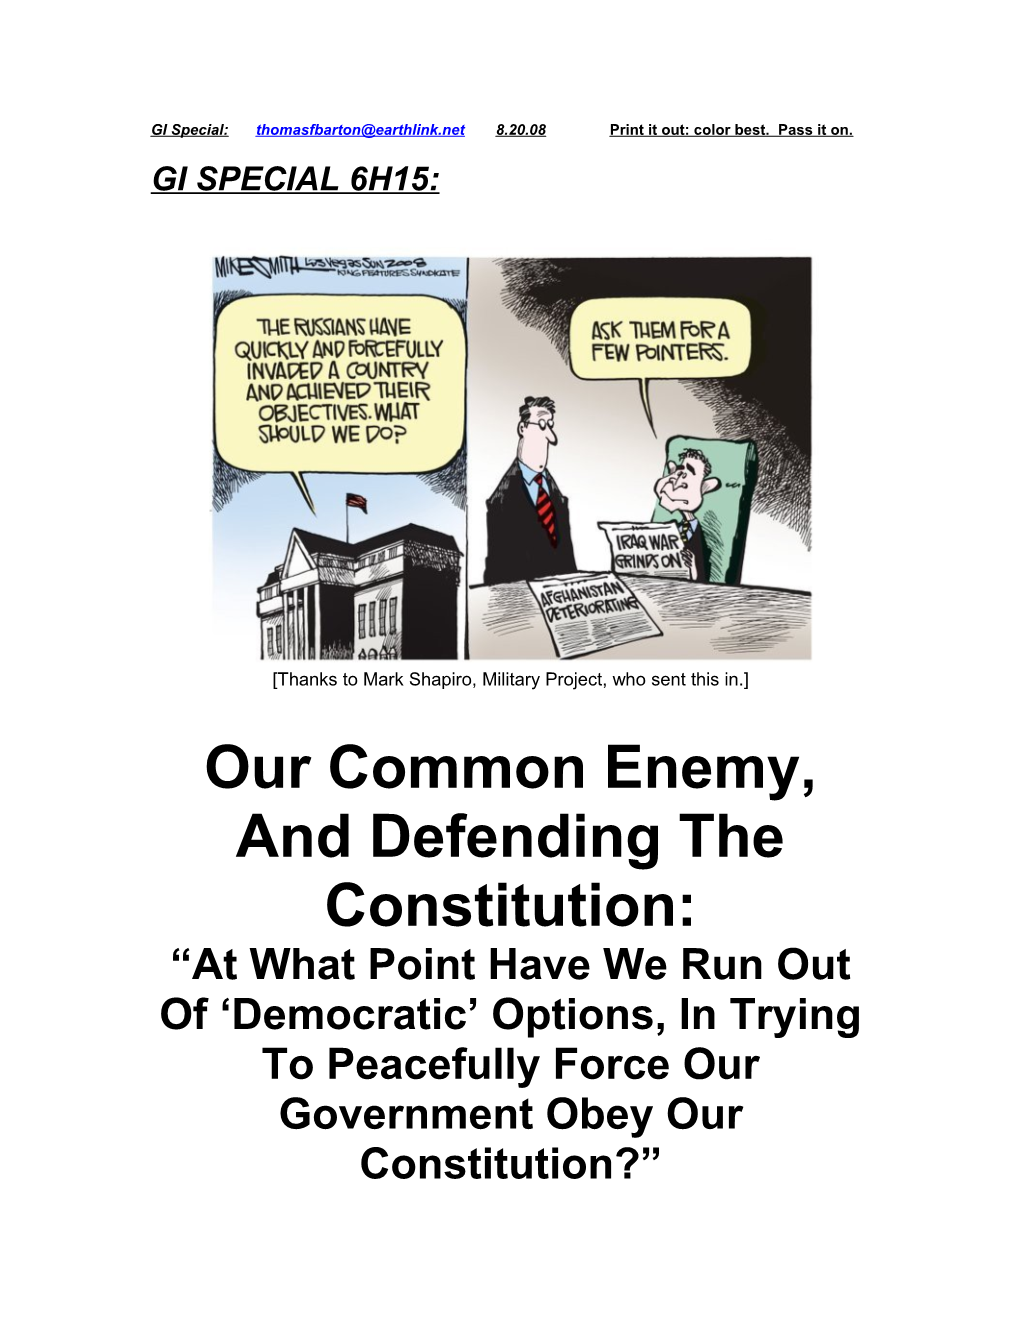 Our Common Enemy, and Defending the Constitution